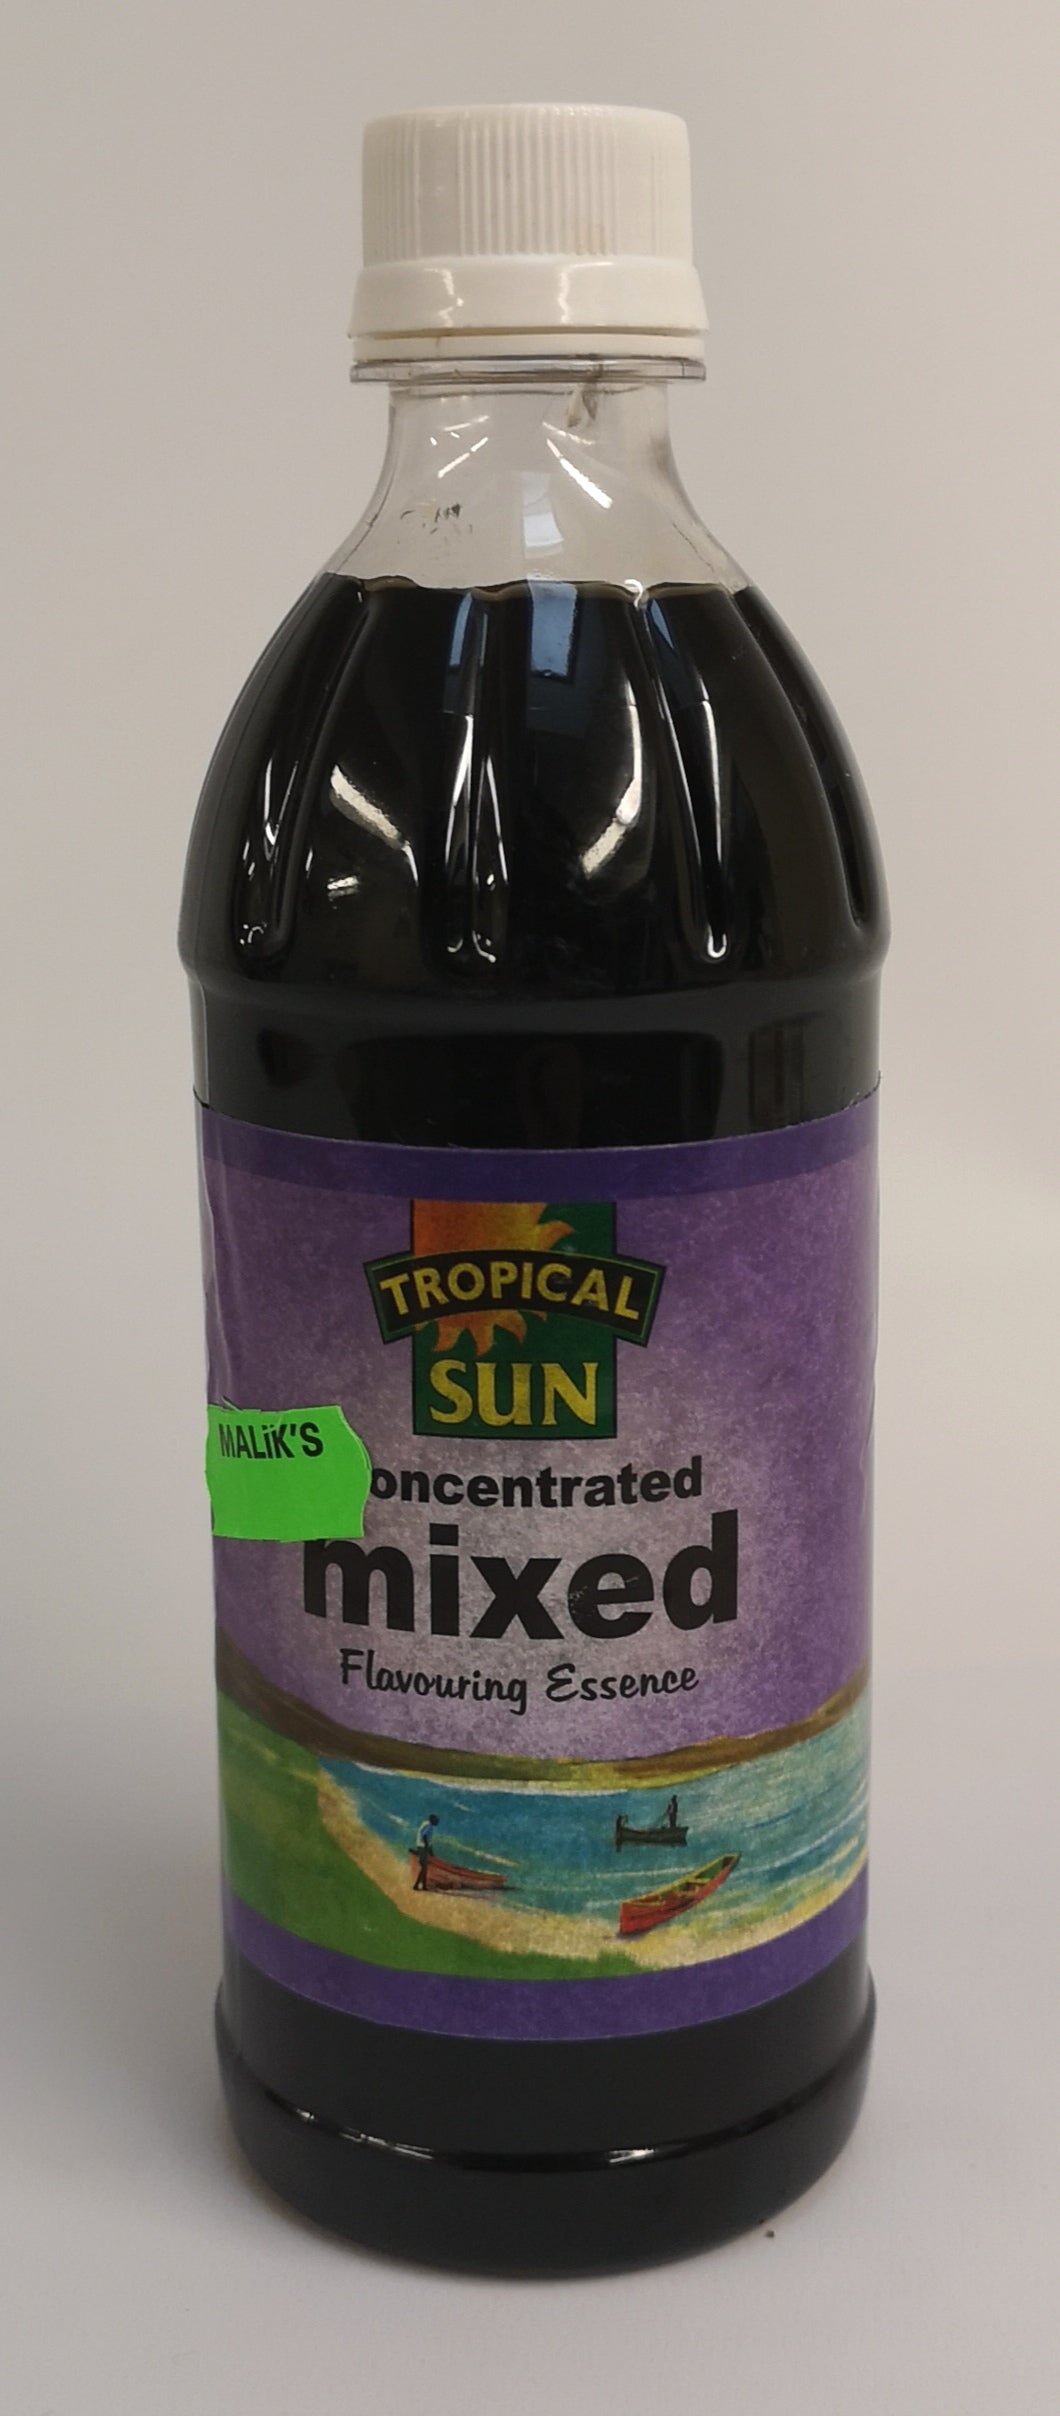 Tropical Sun Concentrated Mixed Flavouring Essence